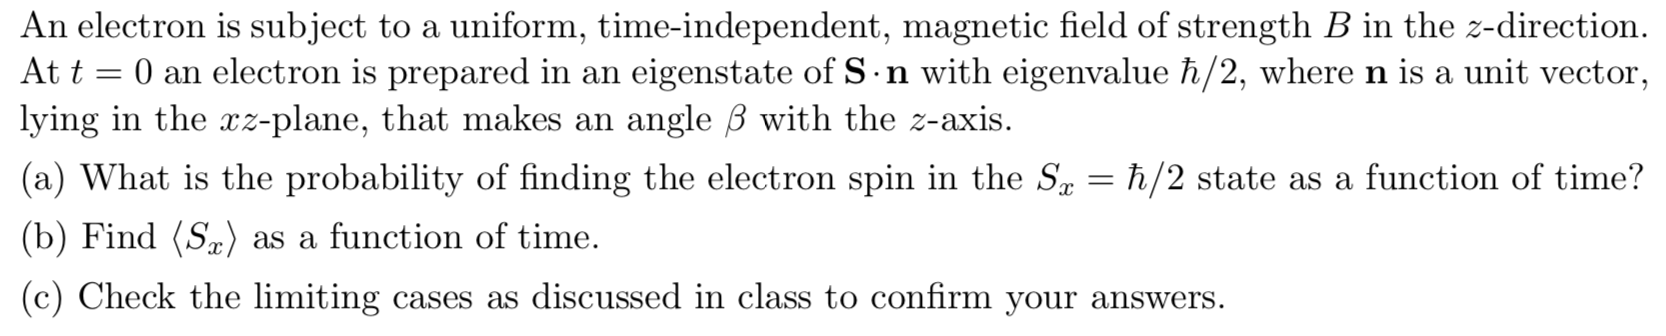 An electron is subject to a uniform, time-independent, magnetic field of strength B in the z-direction
At t 0 an electron is prepared in an
lying in the rz-plane, that makes an
eigenstate of S n with eigenvalue h/2, wheren is a unit vector
angle B with the z-axis.
(a) What is the probability of finding the electron spin in the Sa = h/2 state as a function of time?
(b) Find (Sa)
as a function of time
(c) Check the limiting
cases as discussed in class to confirm your answers.
